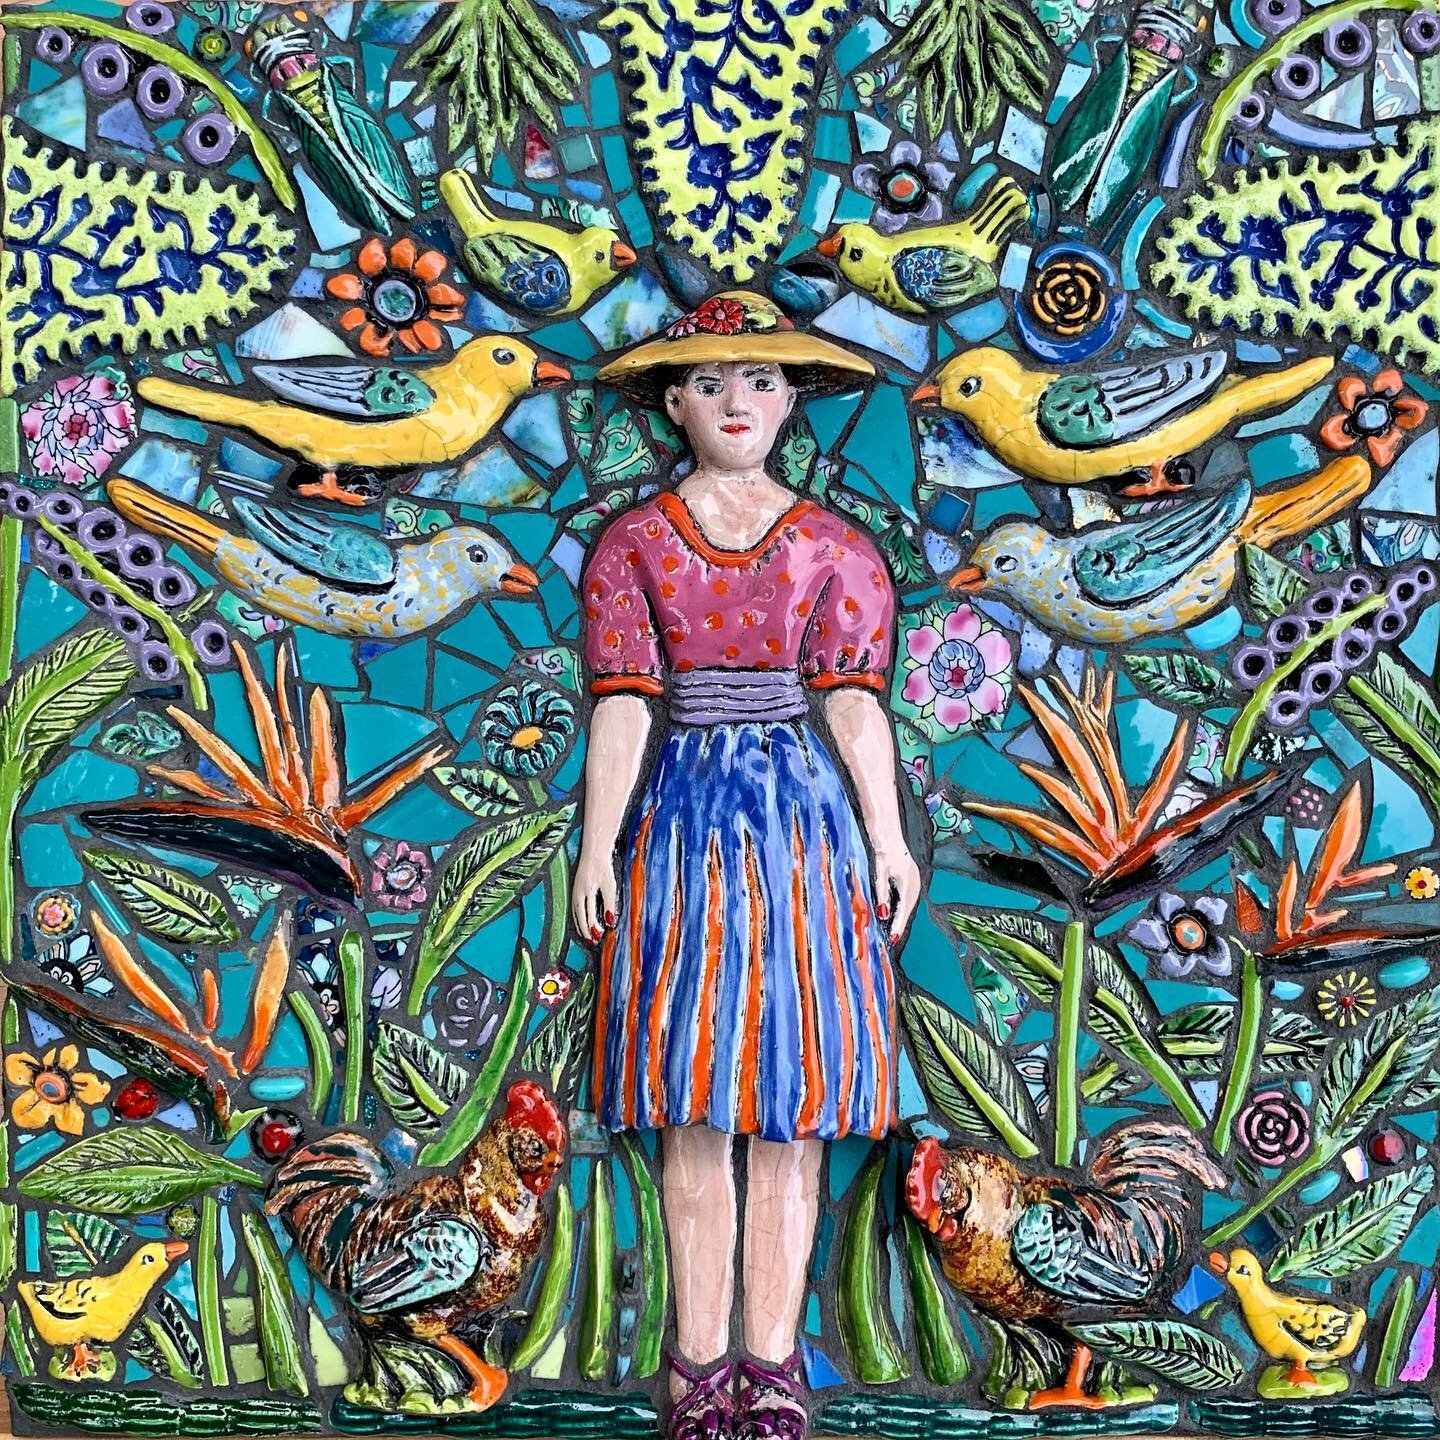 #robyn_sue_miller_mosaics #finished #justgrouted #Evie&rsquo;s_Garden_of_Paradise #NFS #vintageinspired #birdsofparadise #100thanniversary_of_mother&rsquo;s_birth #12&rdquo;x12&rdquo; #MSoP #photofrom1946